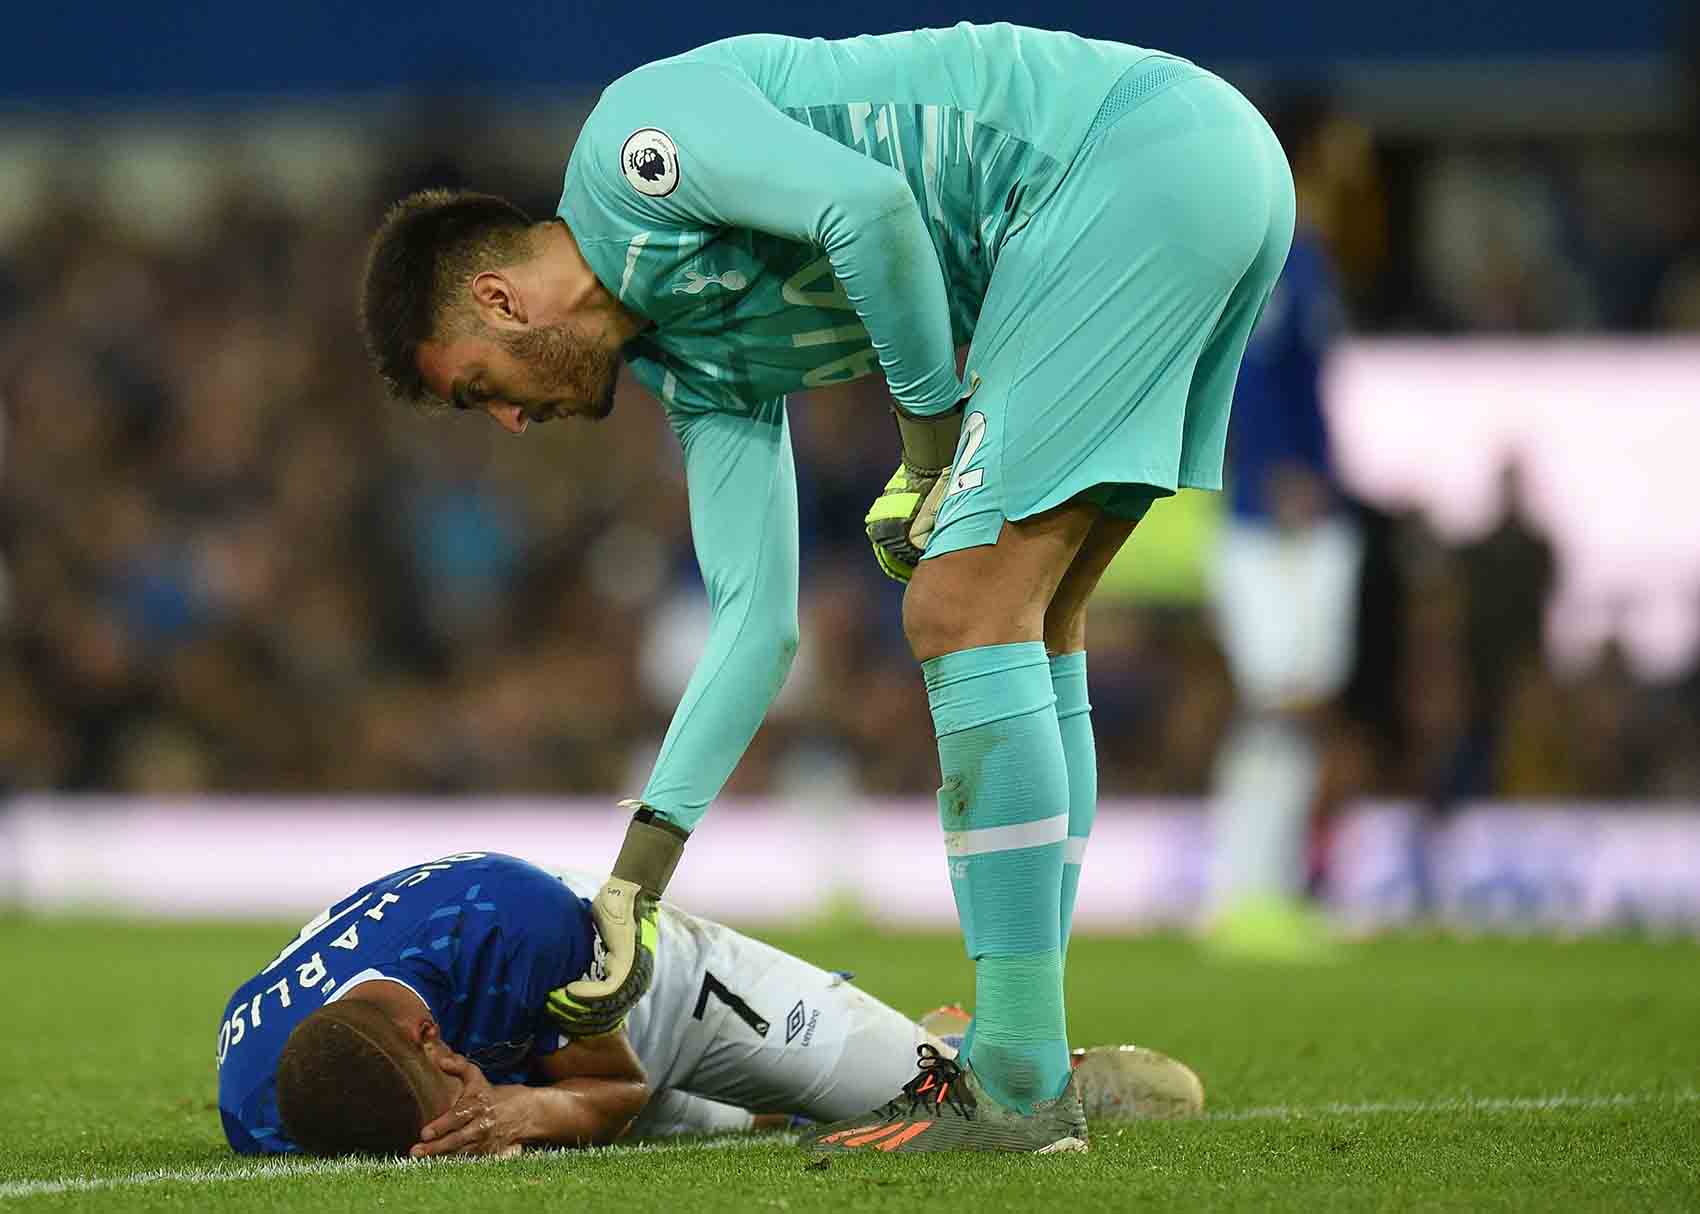 Richarlison is down holding his head following a collision with Tottenham keeper Gazzaniga